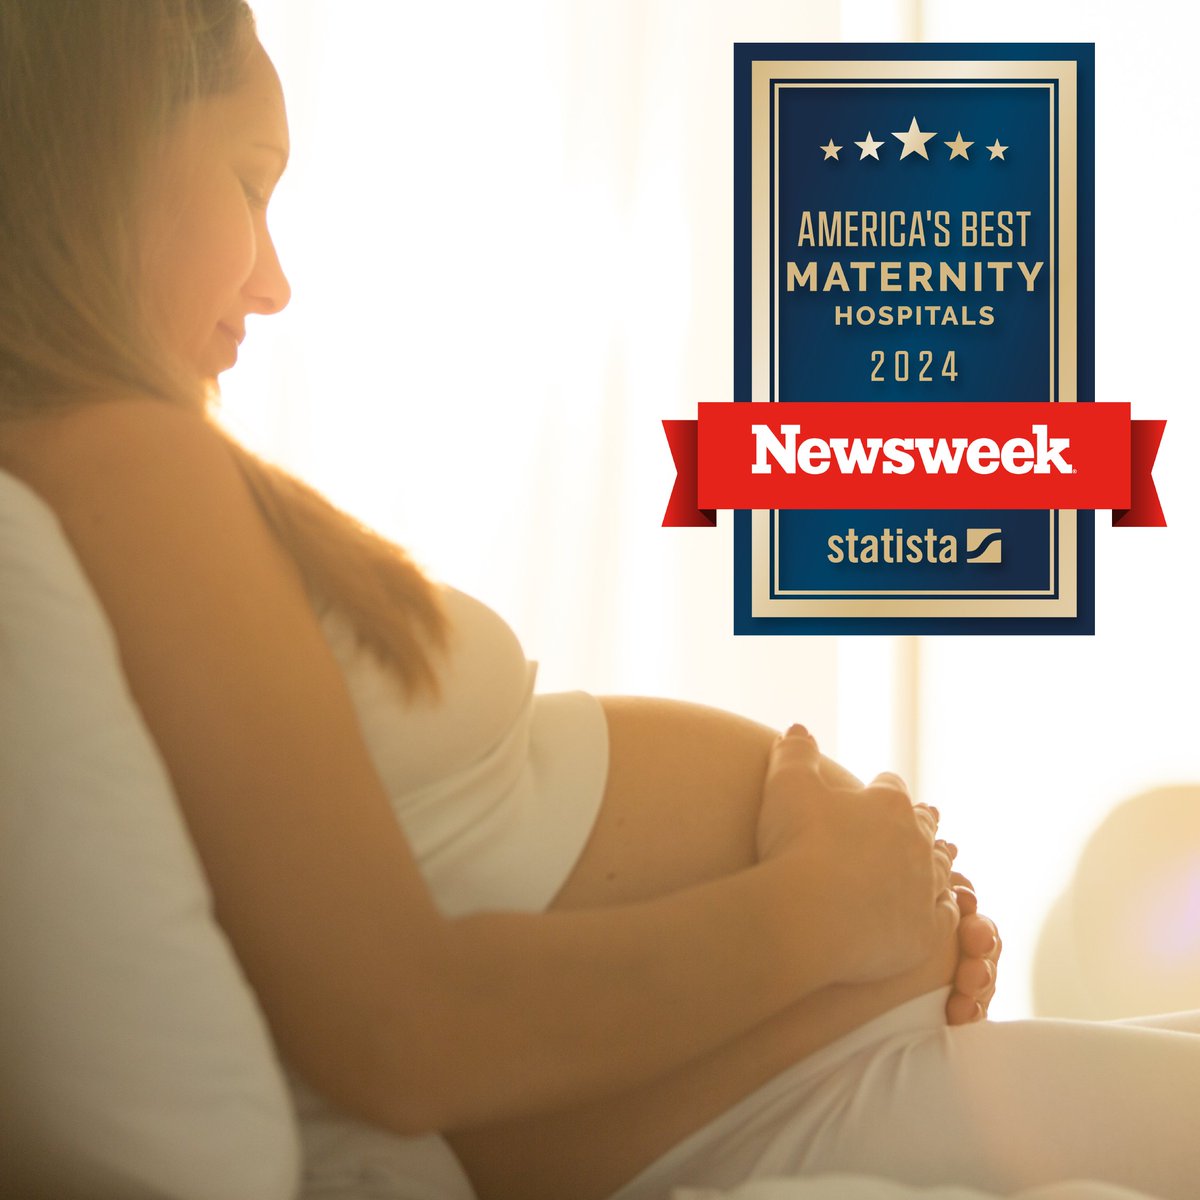 University Hospital is proud to have been named to @Newsweek ’s list of America’s #BestMaternityHospitals 2024! The award list was announced on May 8, 2024 on Newsweek.com. High-quality #maternitycare is key to the long-term health of newborns & women who give birth.